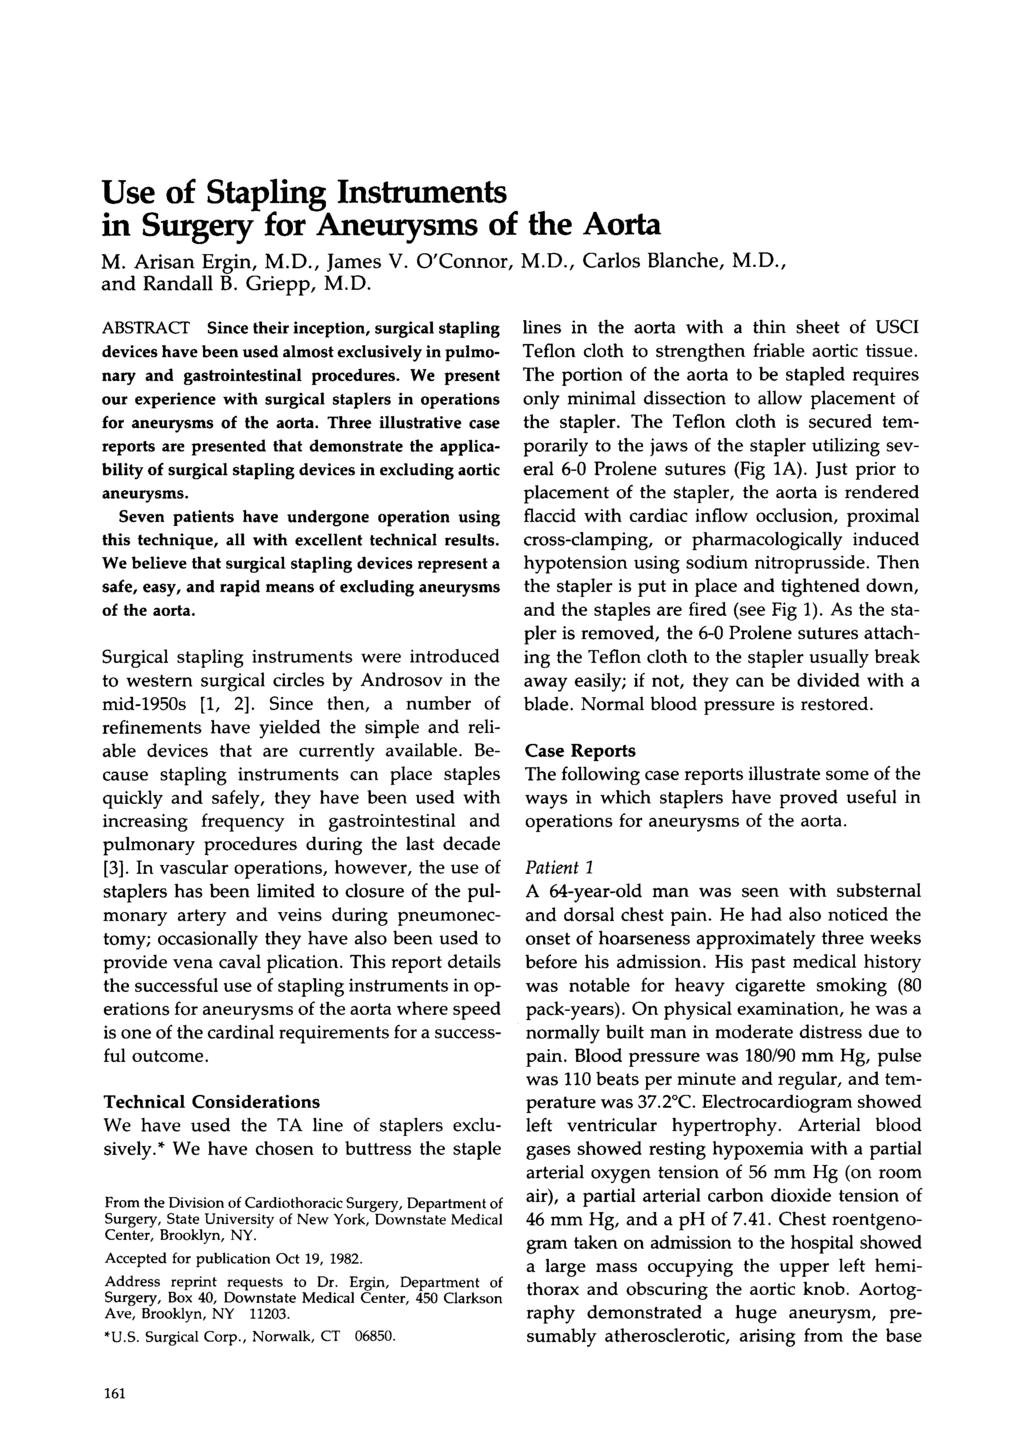 Use of Stapling Instruments in Surgery for Aneurysms of the Aorta M. Arisan Ergin, M.D.